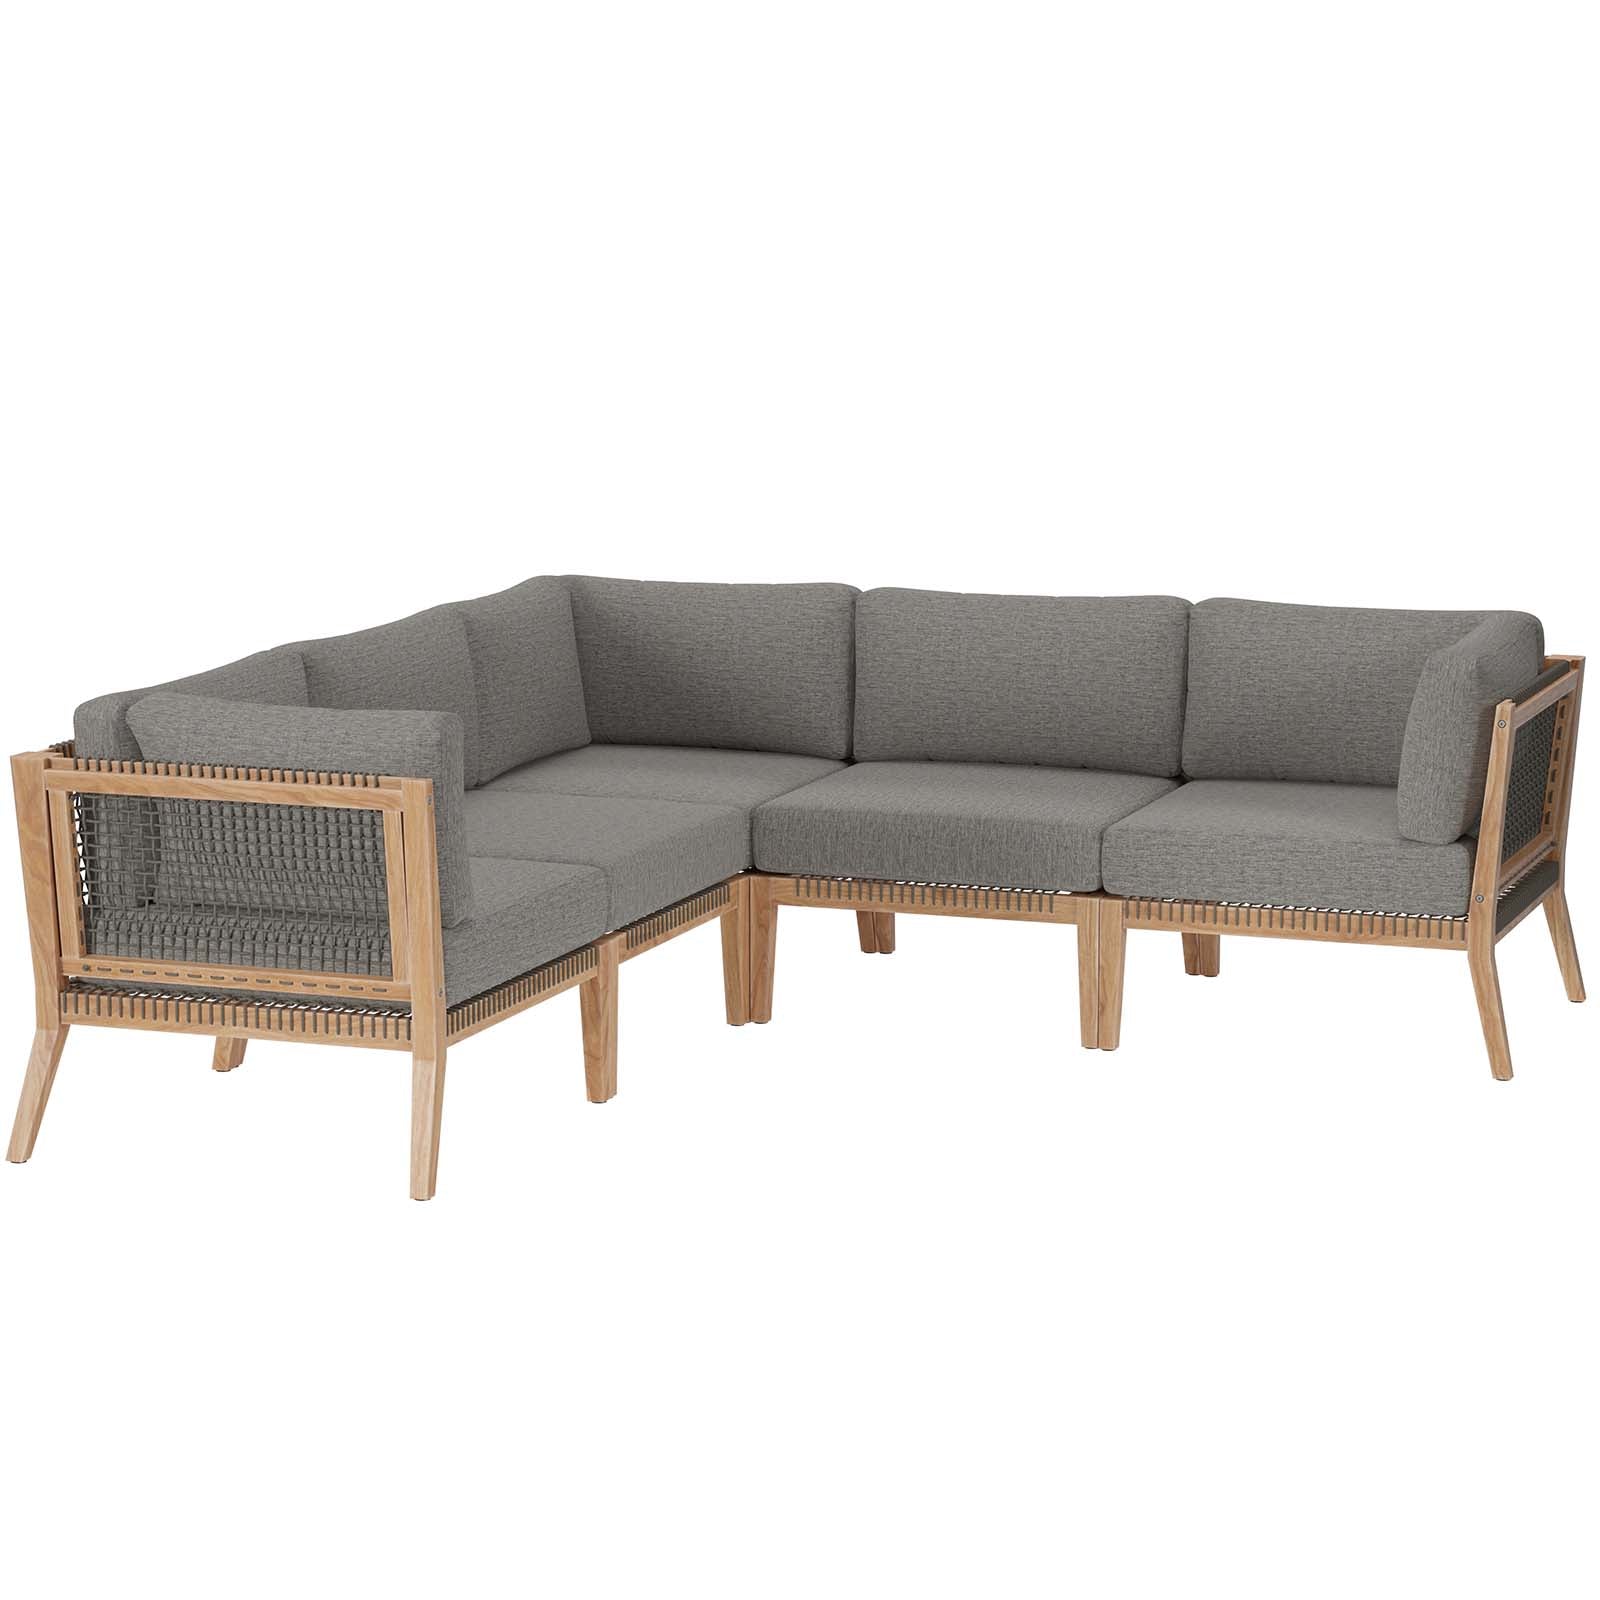 Modway Outdoor Sofas - Clearwater-Outdoor-Patio-Teak-Wood-5-Piece-Sectional-Sofa-Gray-Graphite